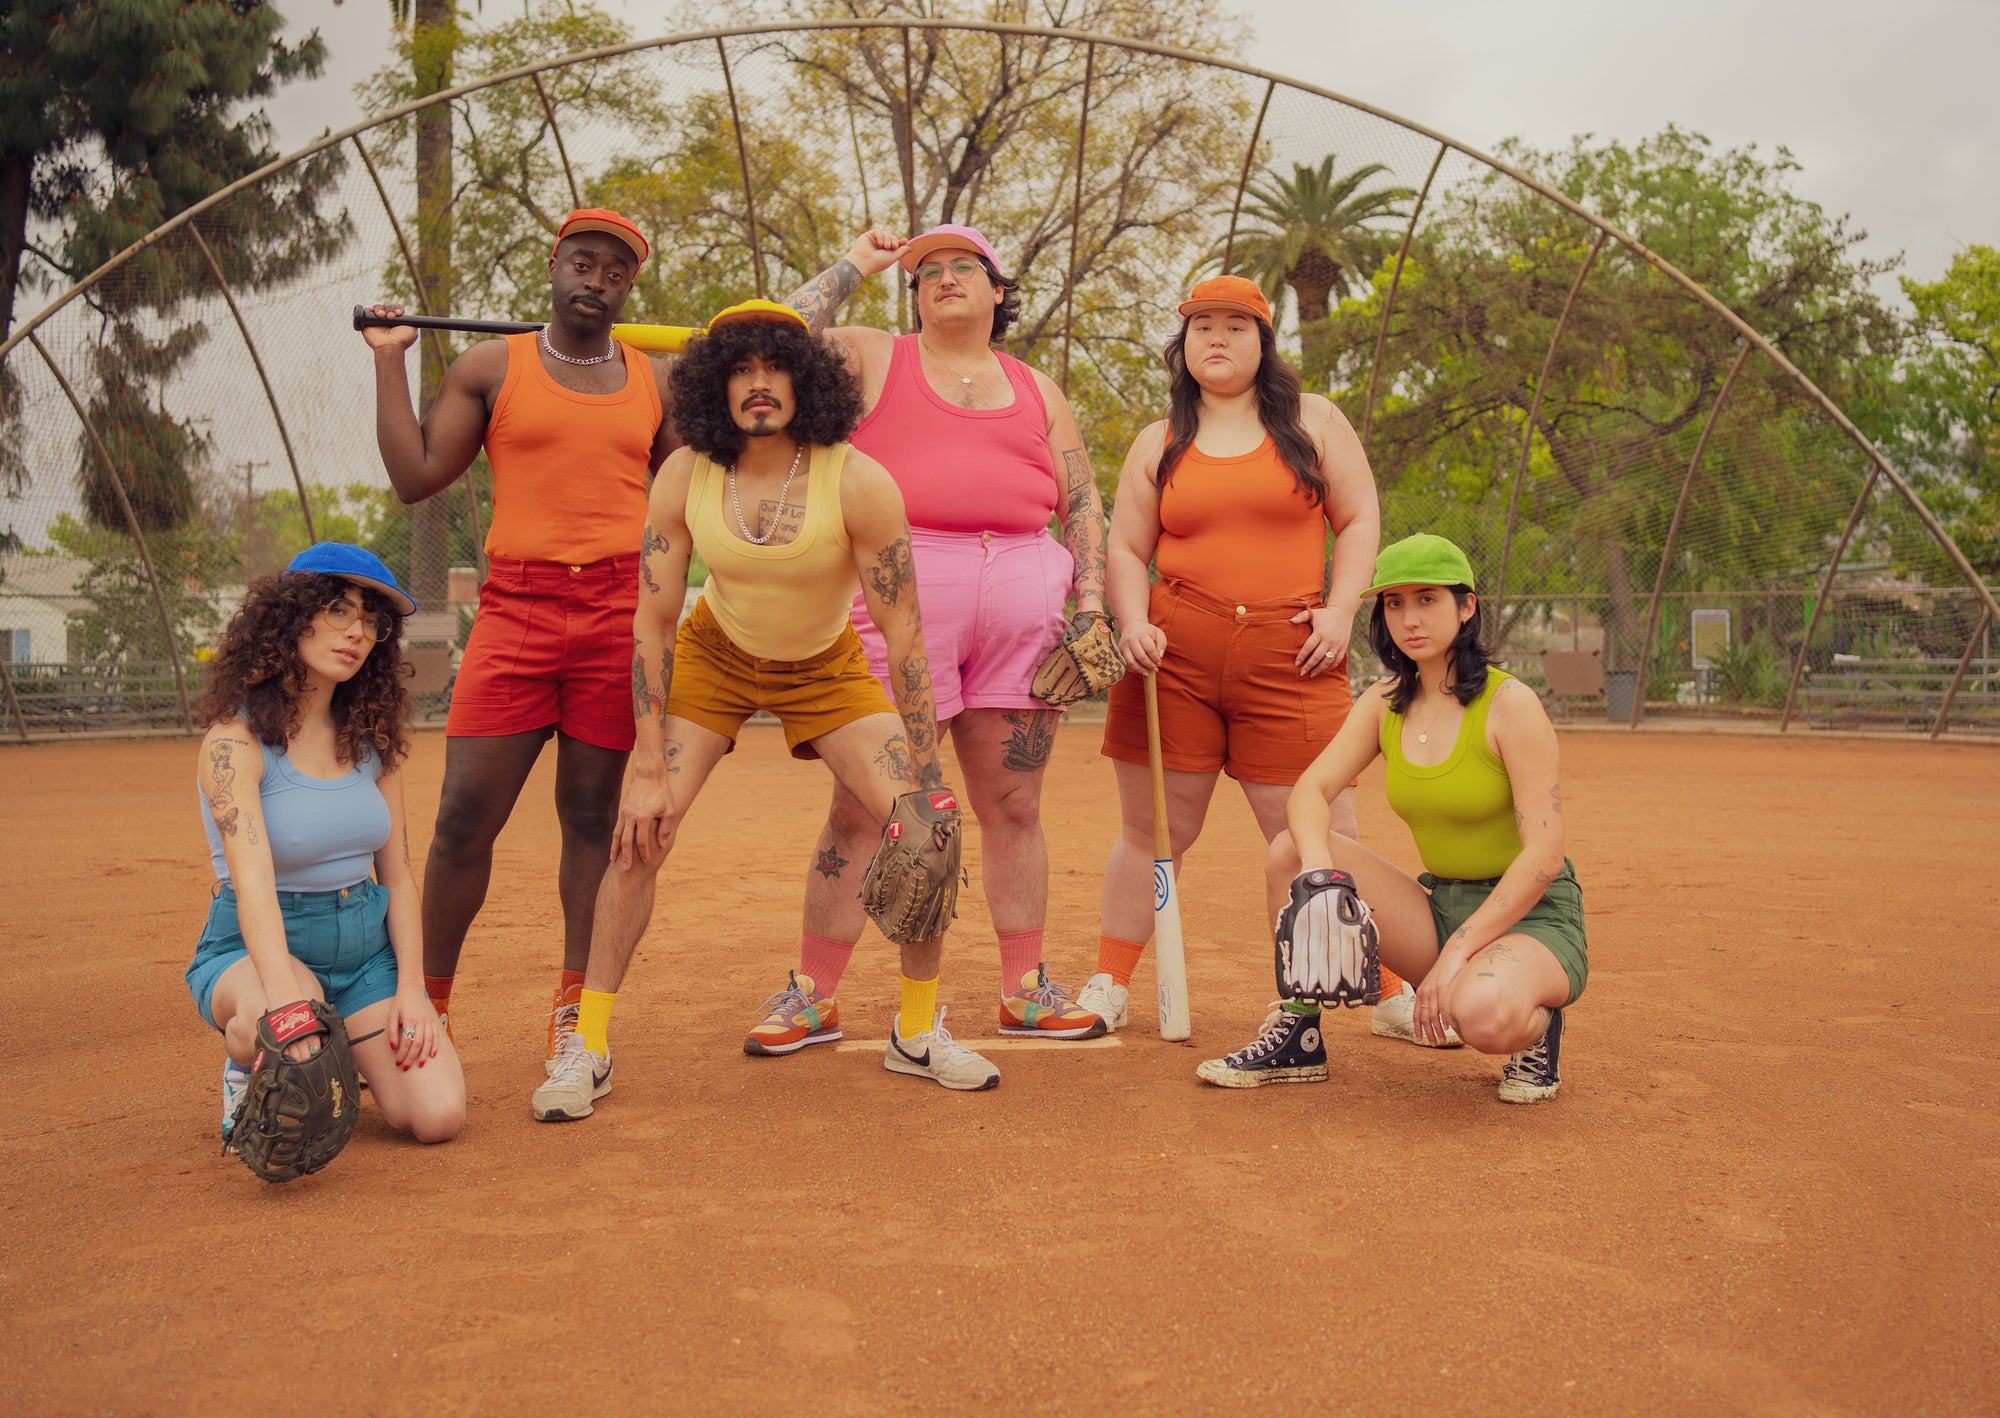 Rene, Eli, Jesse, Sam, Ashley and Betty all wearing Dug Out Hats, The Tank Top, and Work Shorts in a variety of hues.